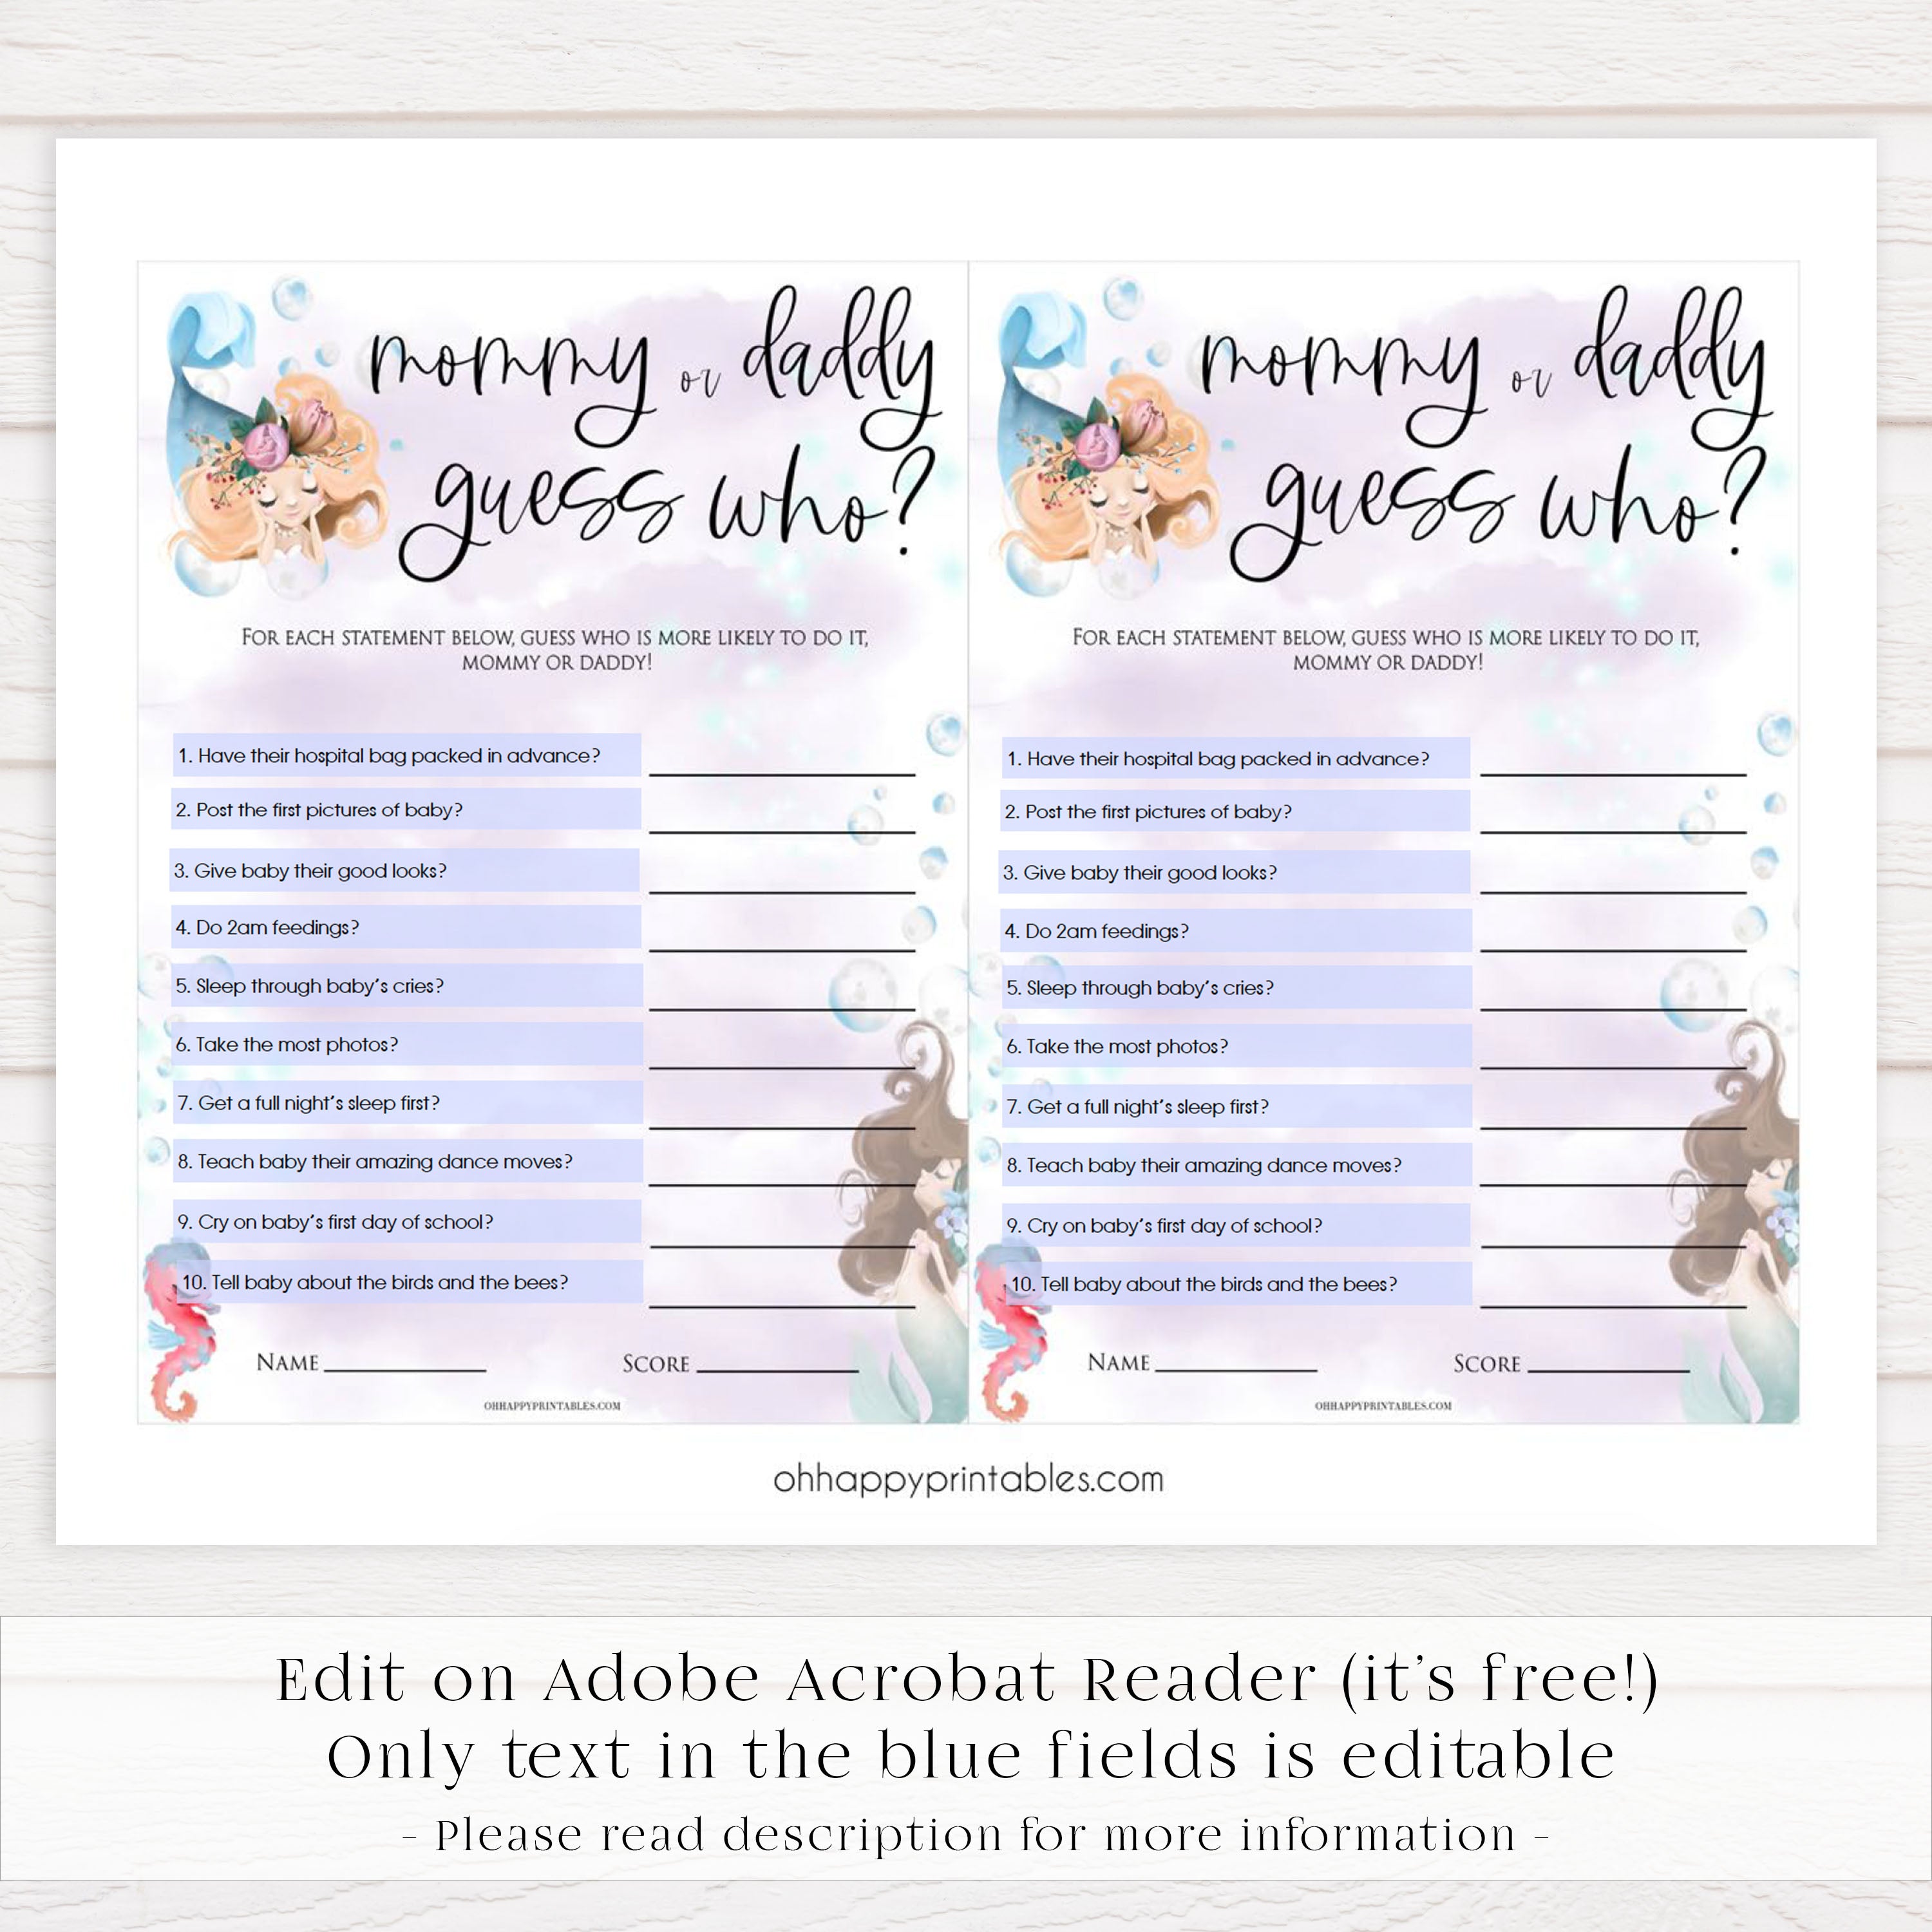 mommy or daddy guess who game, baby he said she said game, Printable baby shower games, little mermaid baby games, baby shower games, fun baby shower ideas, top baby shower ideas, little mermaid baby shower, baby shower games, pink hearts baby shower ideas